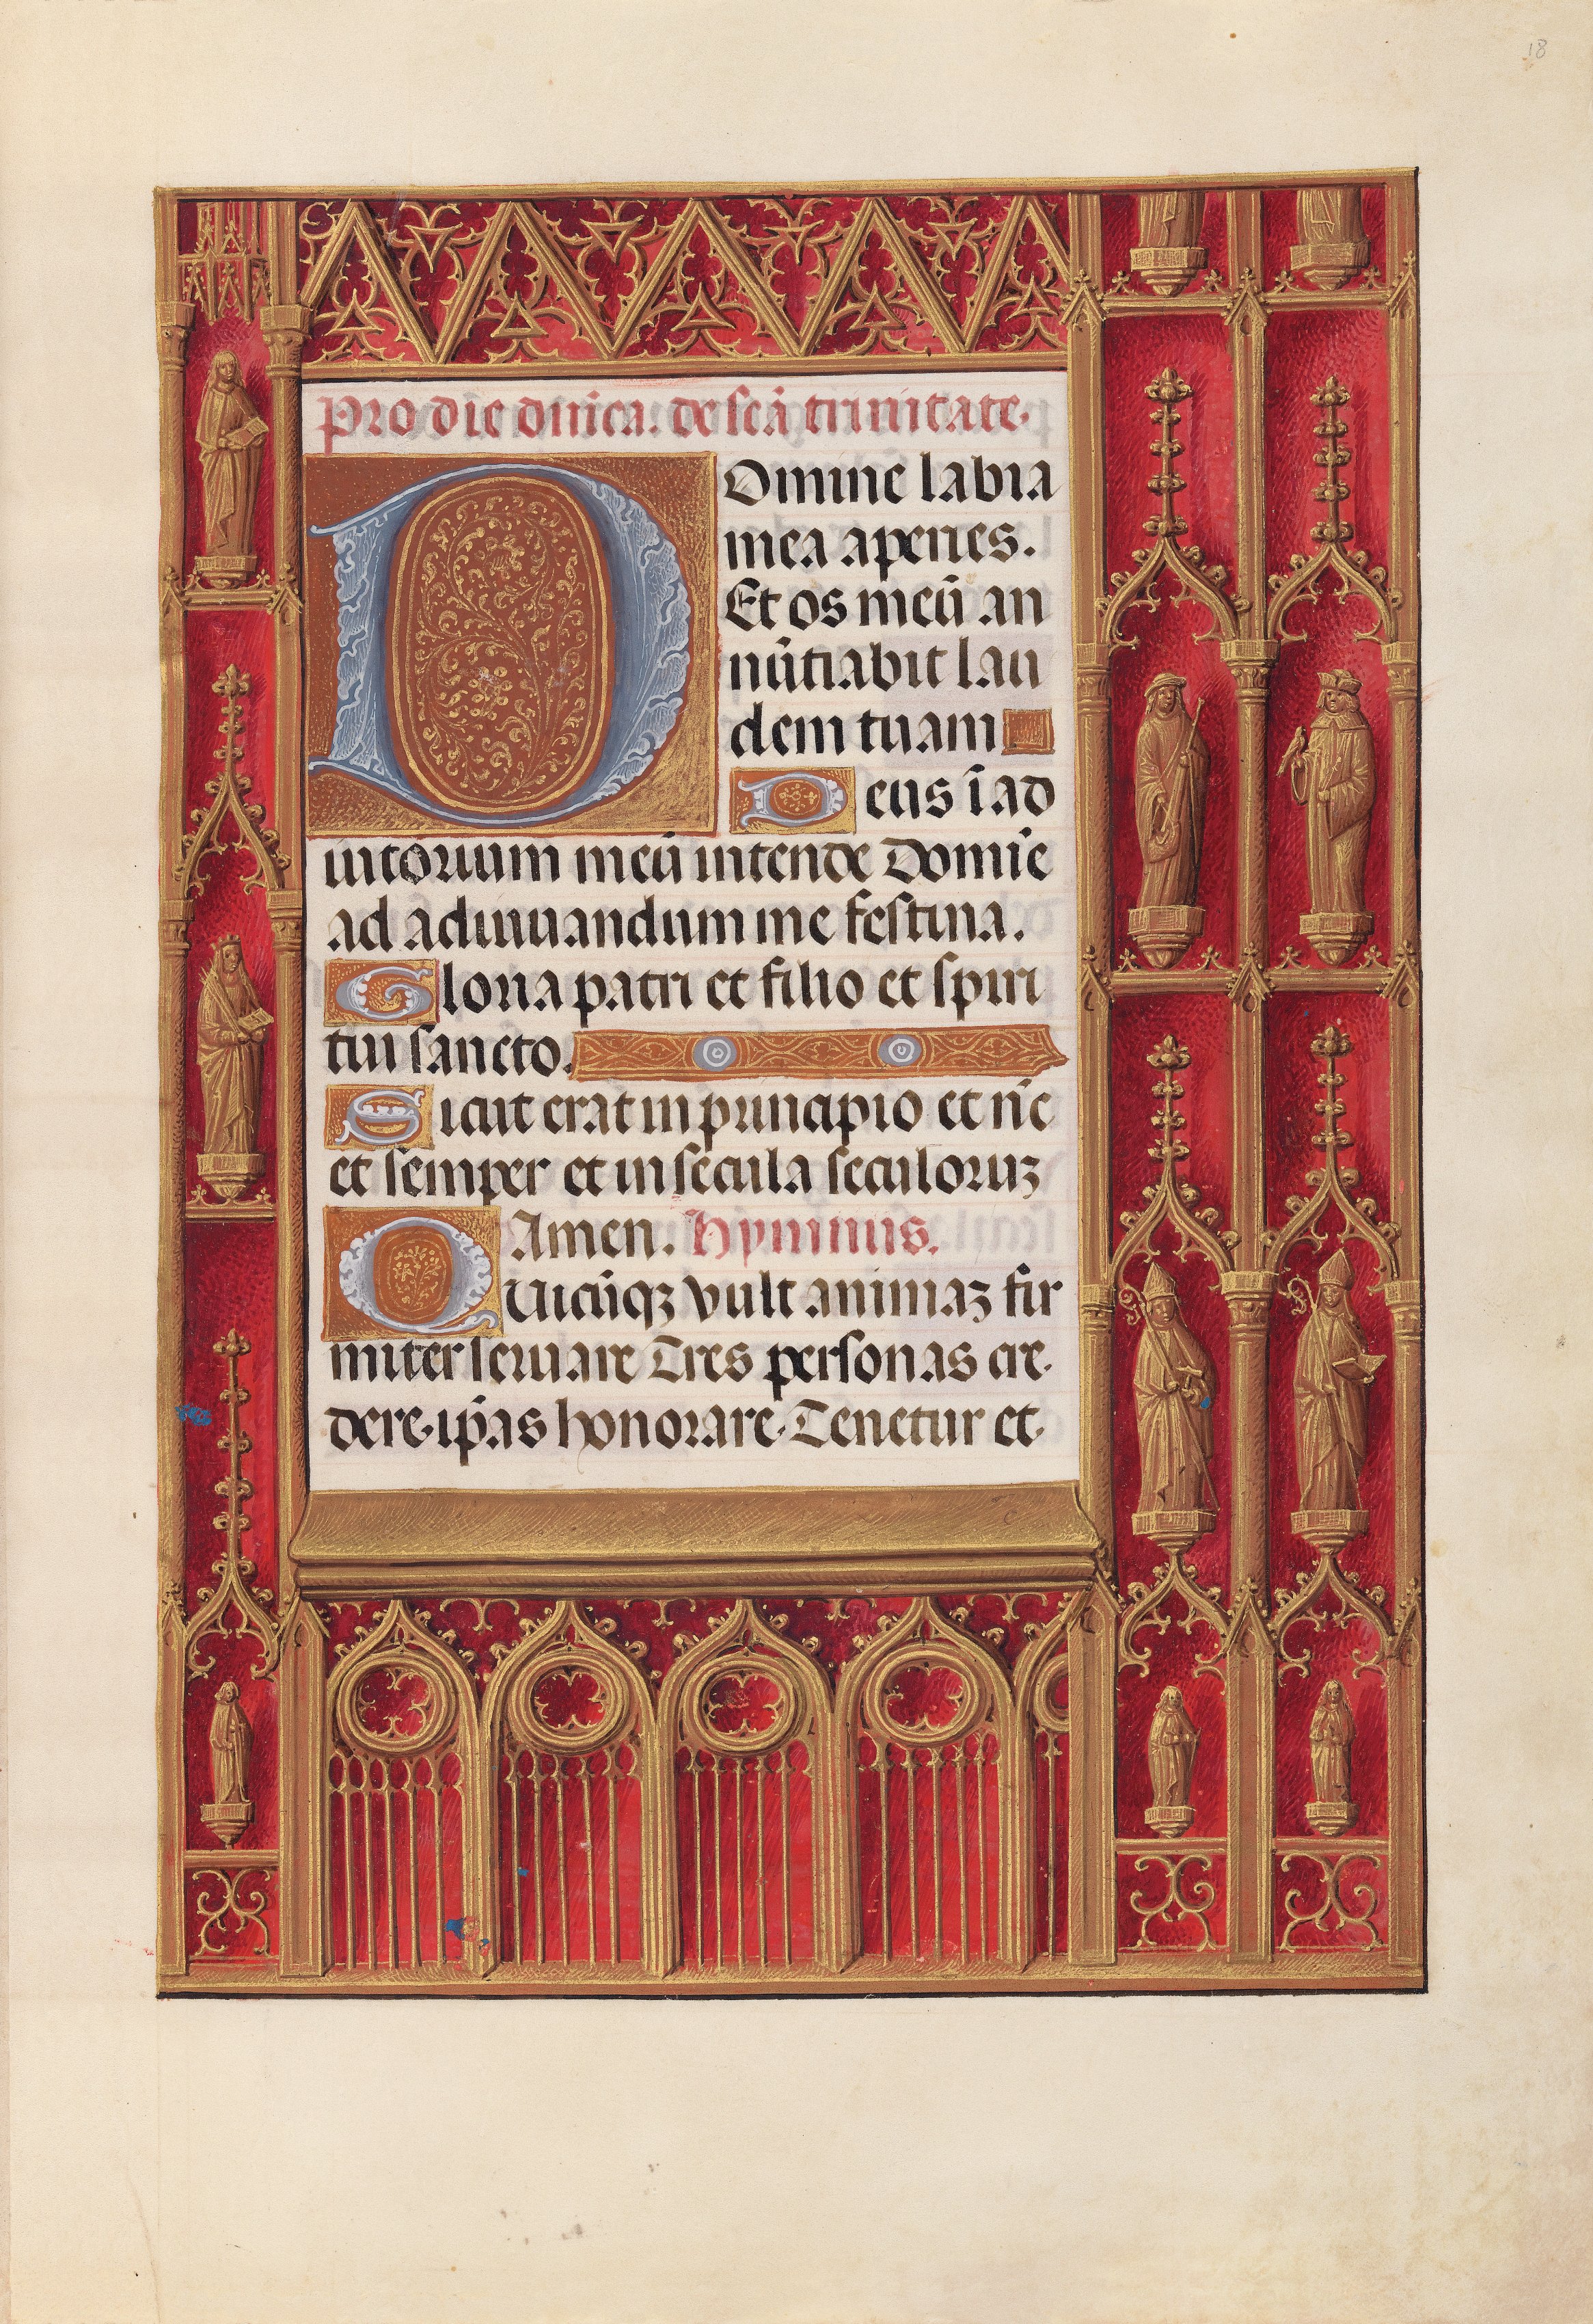 Hours of Queen Isabella the Catholic, Queen of Spain:  Fol. 18r